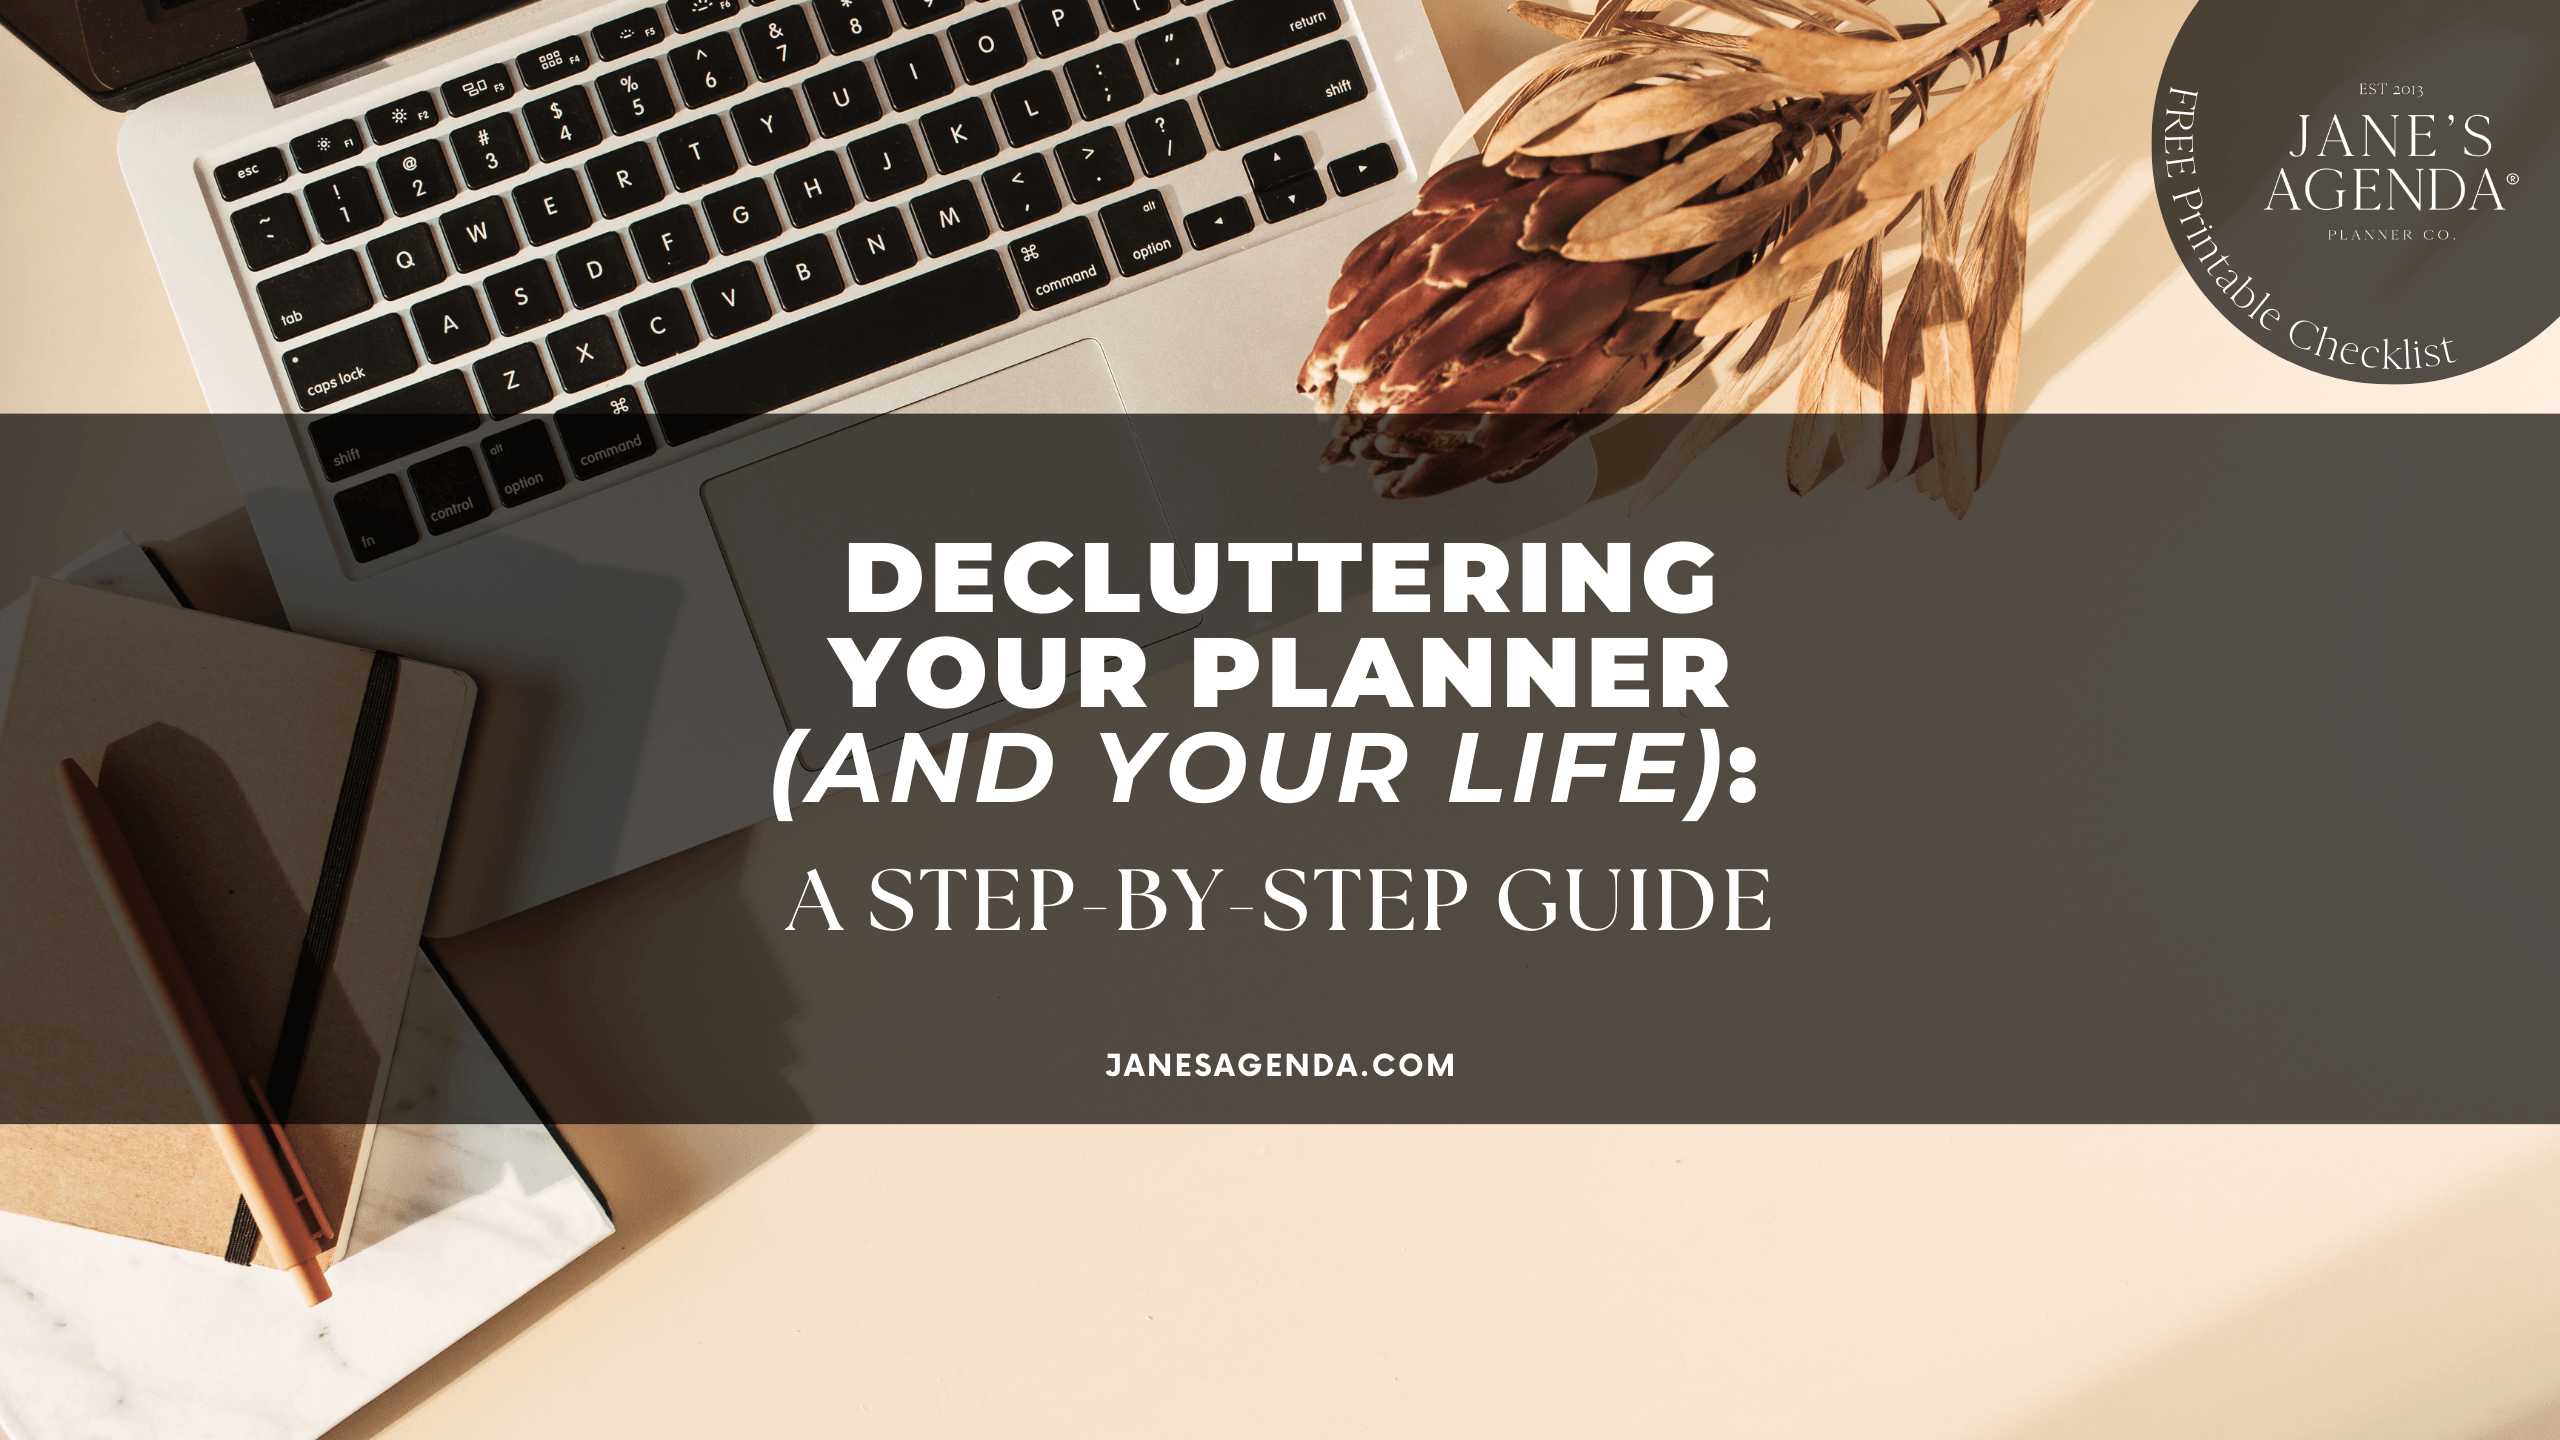 Decluttering Your Planner and Life